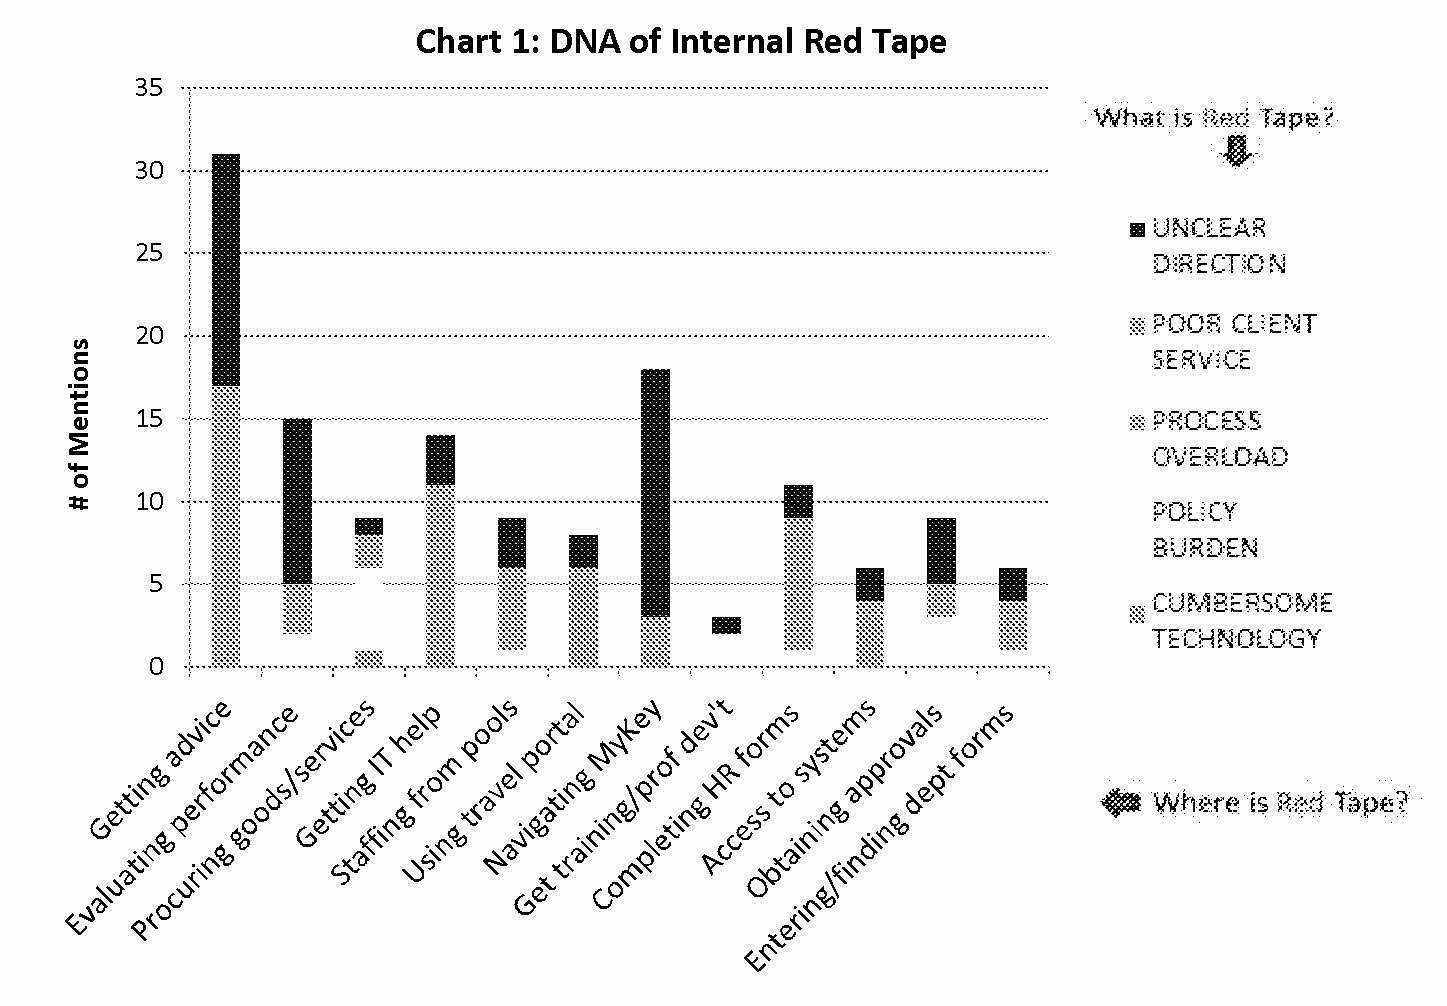 A chart of the “DNA of Internal Red Tape”, measuring mentions of unclear direction, poor client service, process overload, policy burden, and cumbersome technology across a variety of workplace activities.